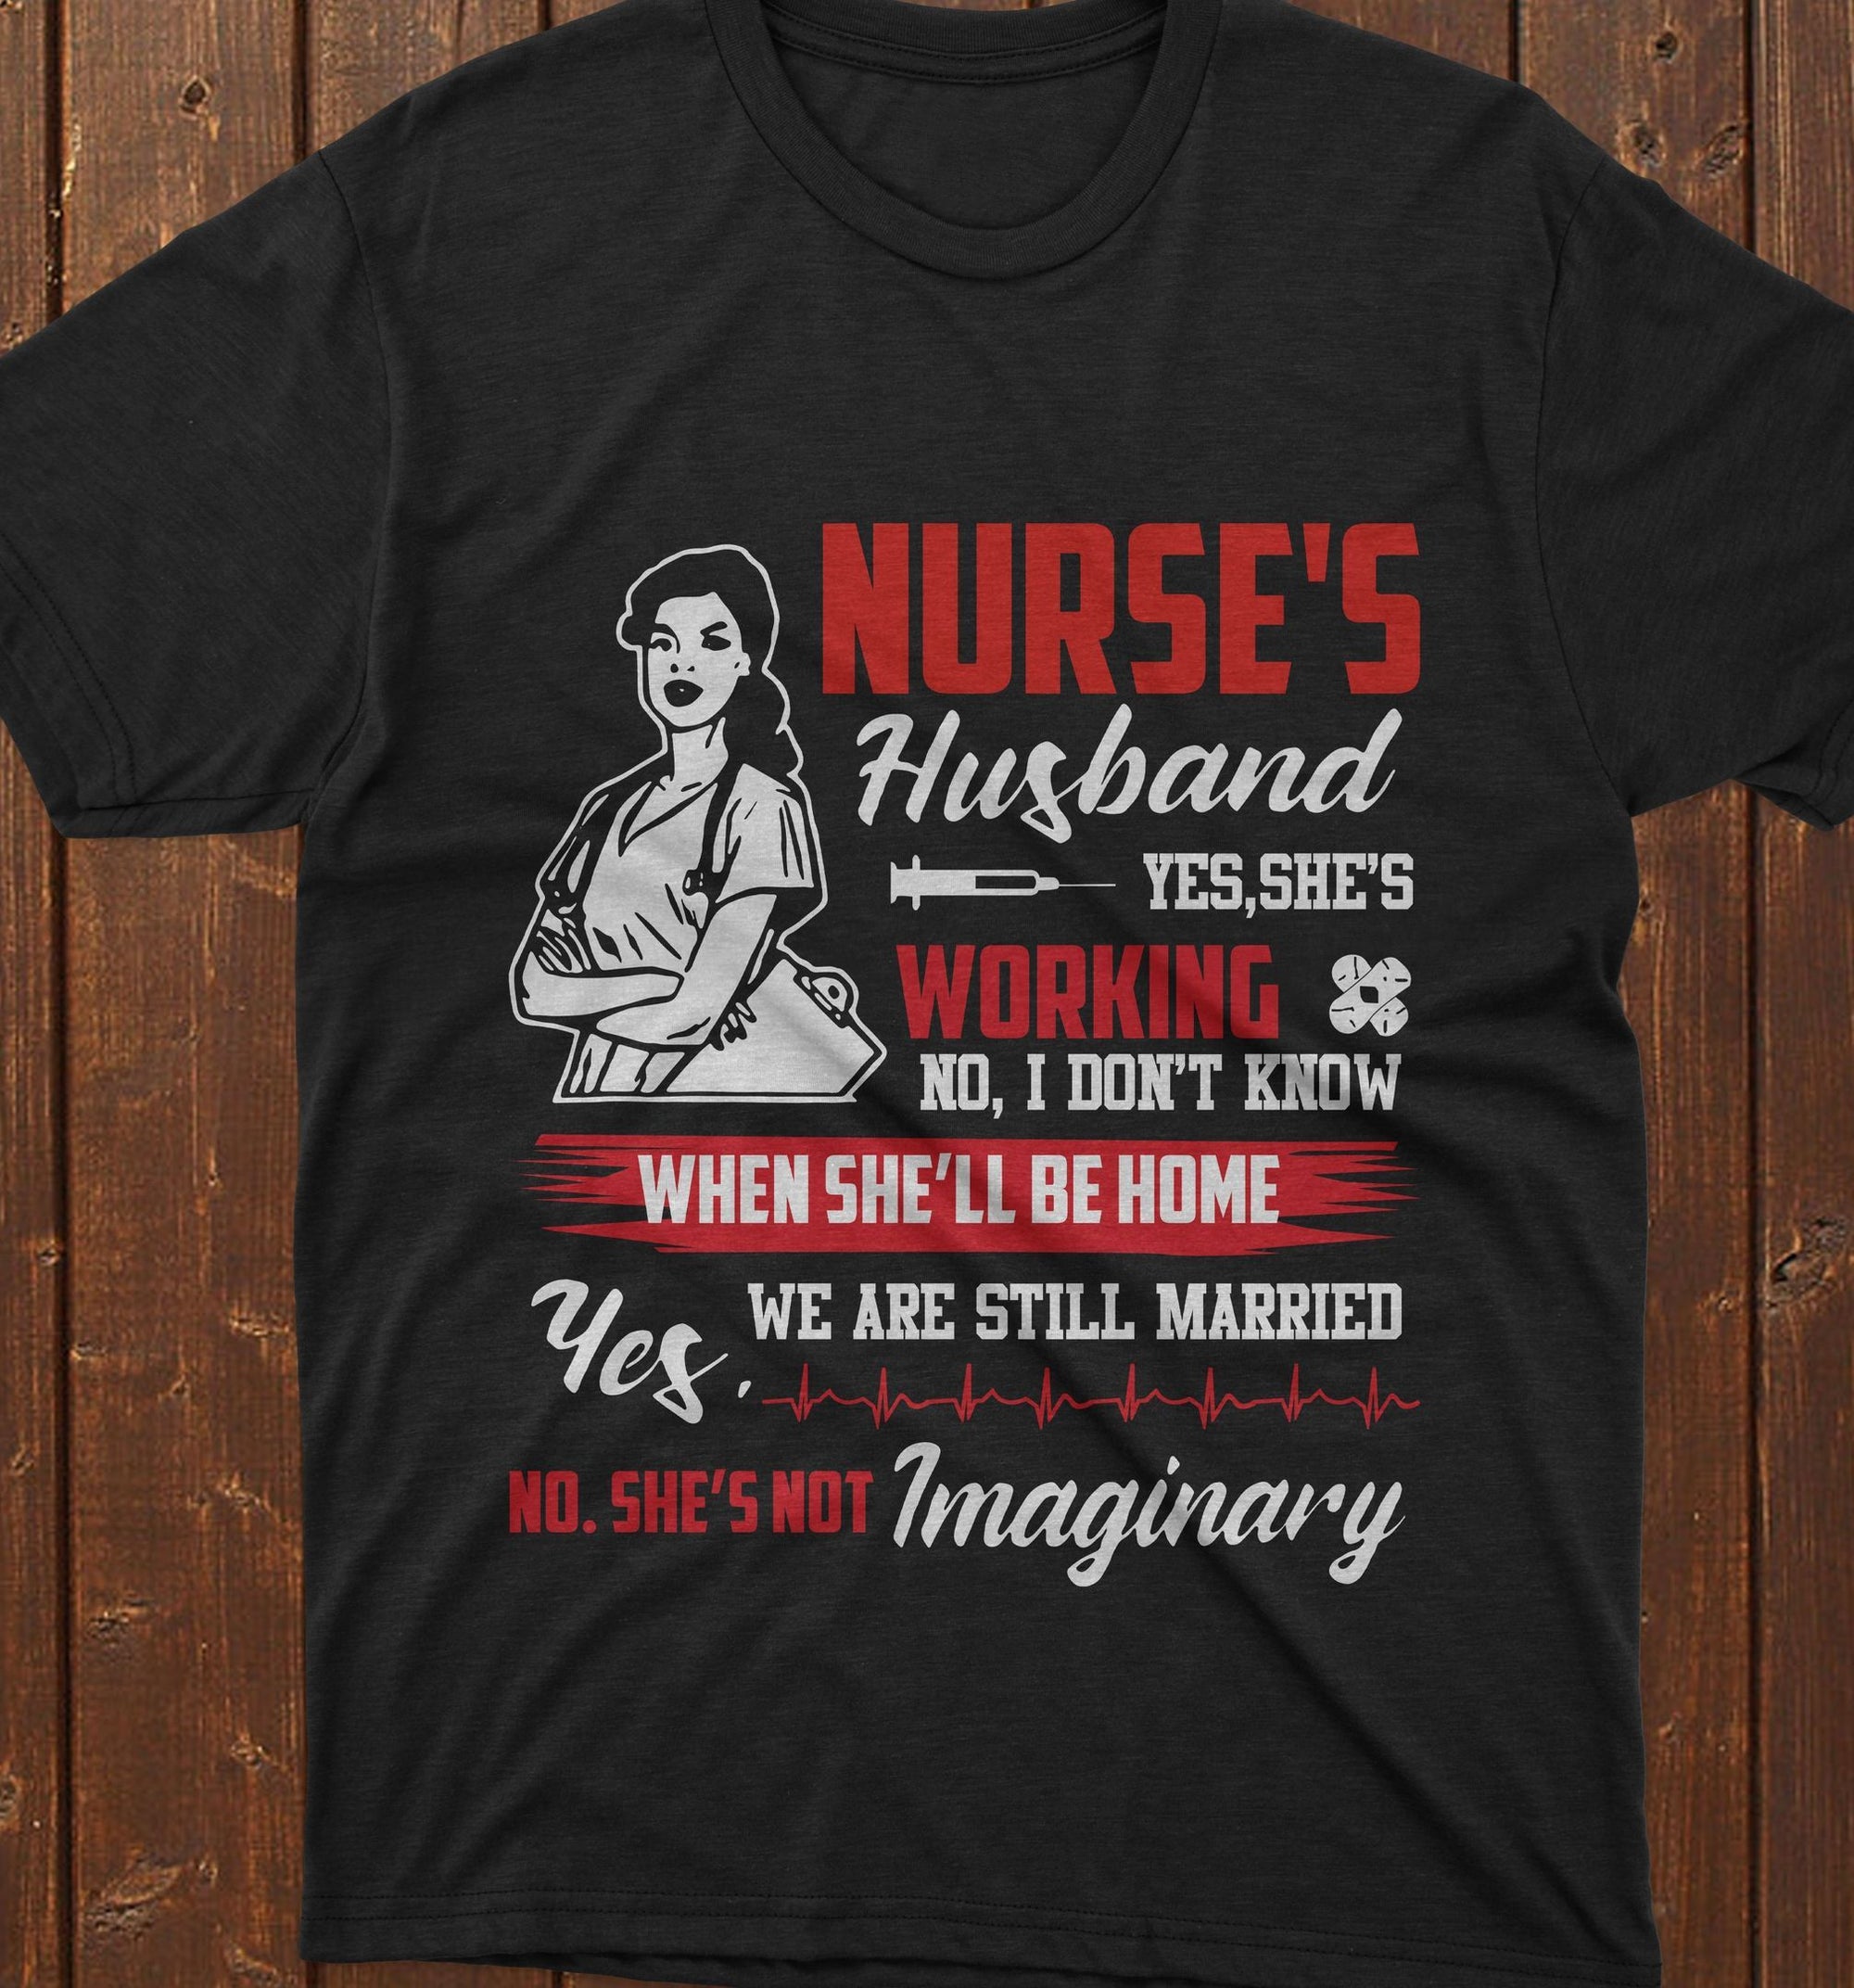 PresentsPrints, Nurse's day nurse's husband yes she's working no i don't know when she'll be home we are still married, Nurse T-Shirt